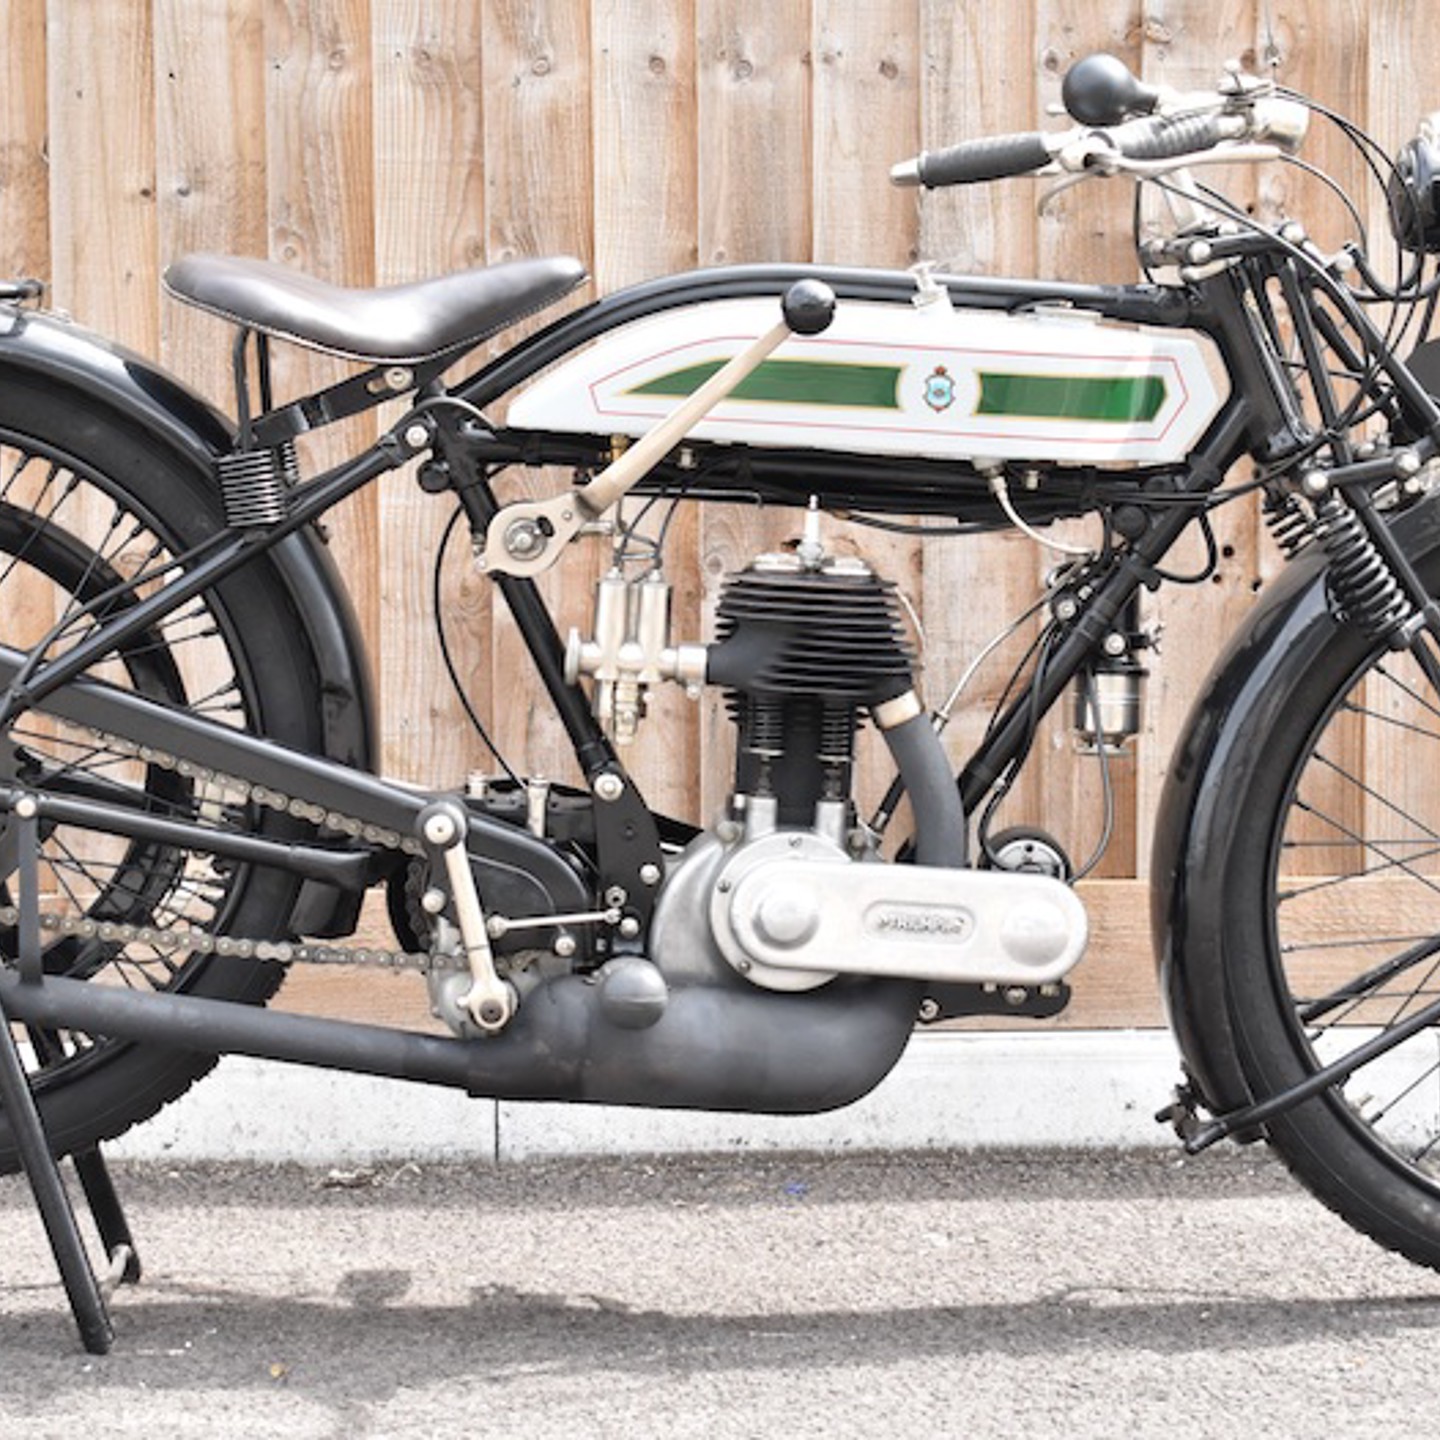 1925 Triumph Model P 500Cc Motorcycle Sold For £9072